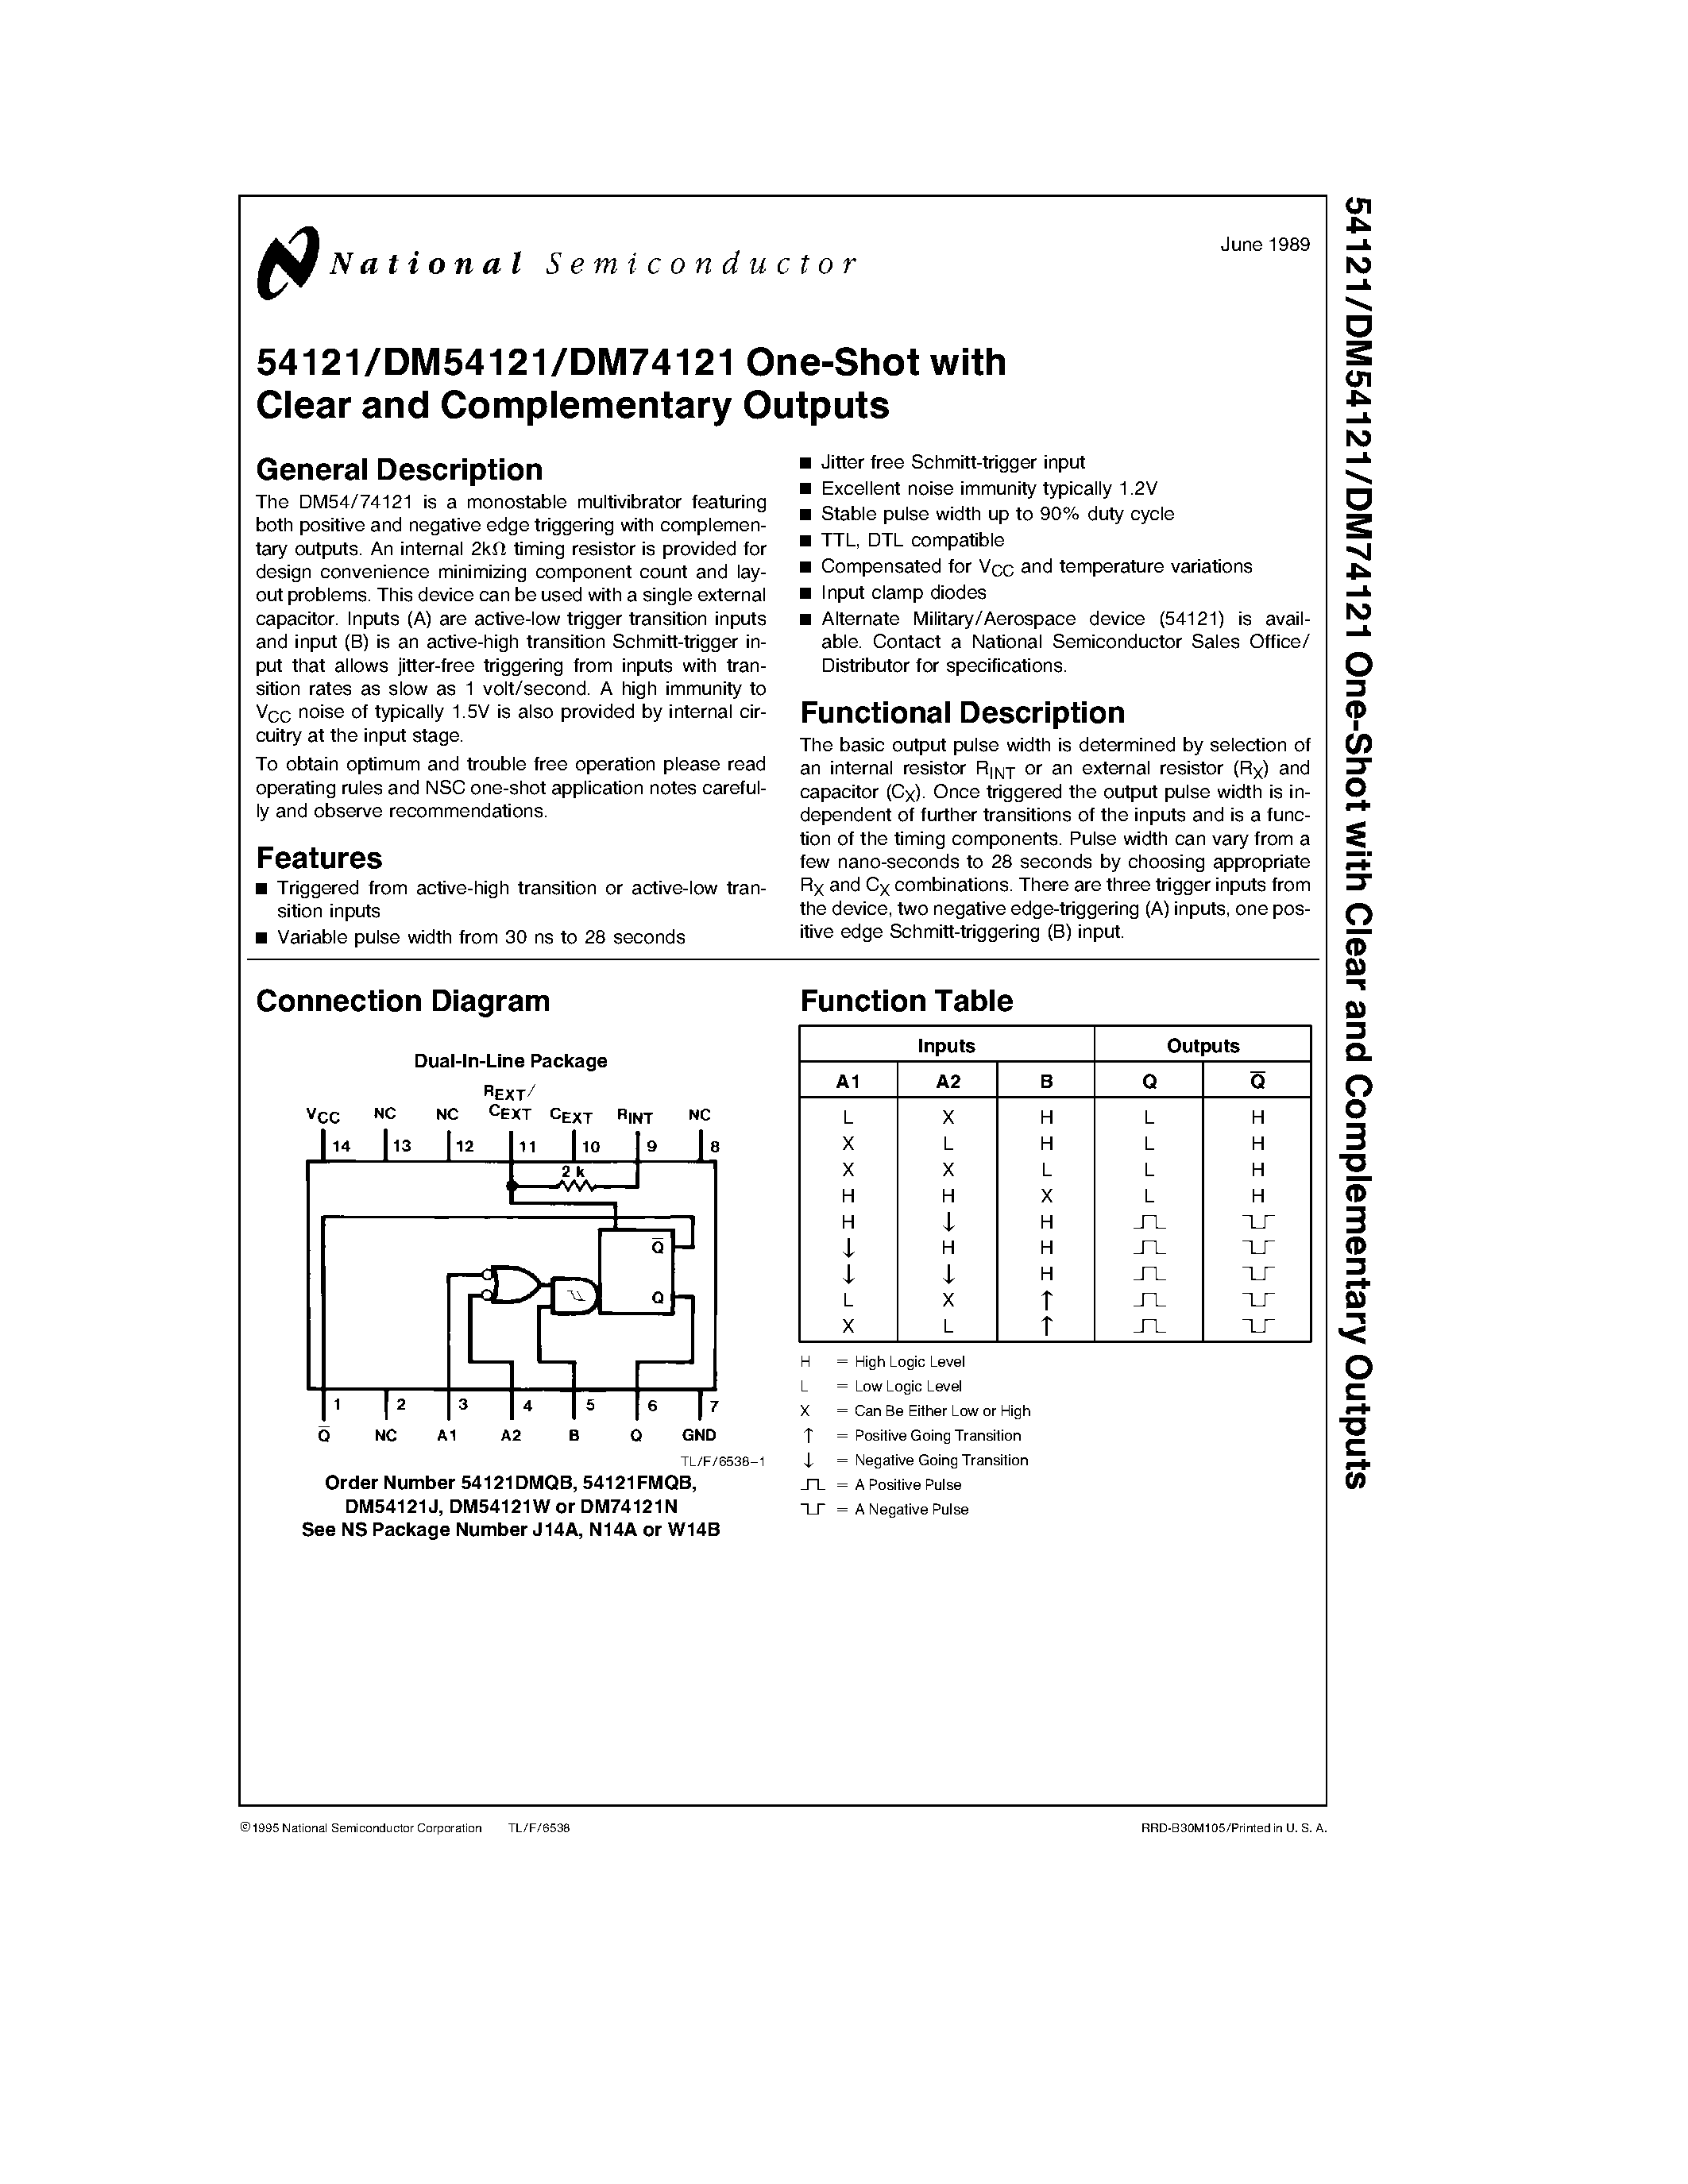 Datasheet 54121FMQB - One-Shot with Clear and Complementary Outputs page 1